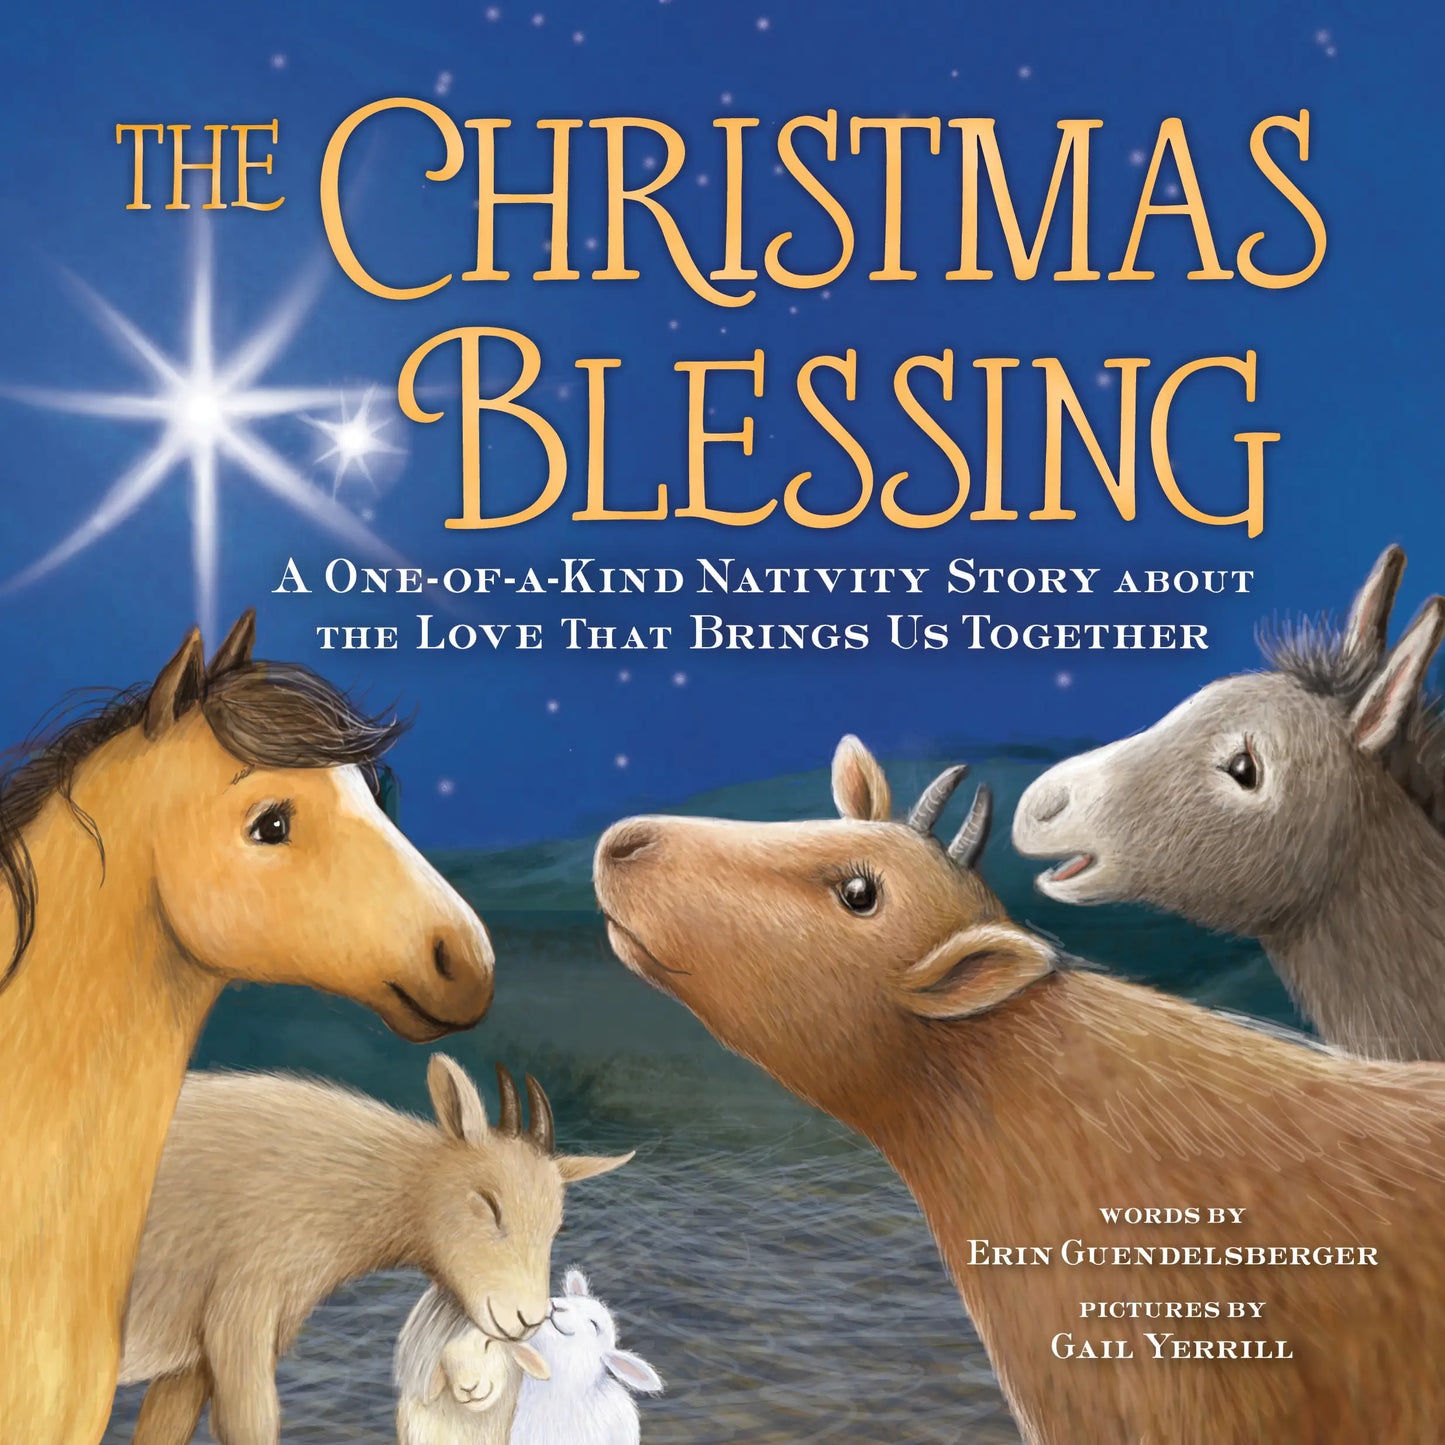 The Christmas Blessing: A One-of-a-Kind Nativity Story